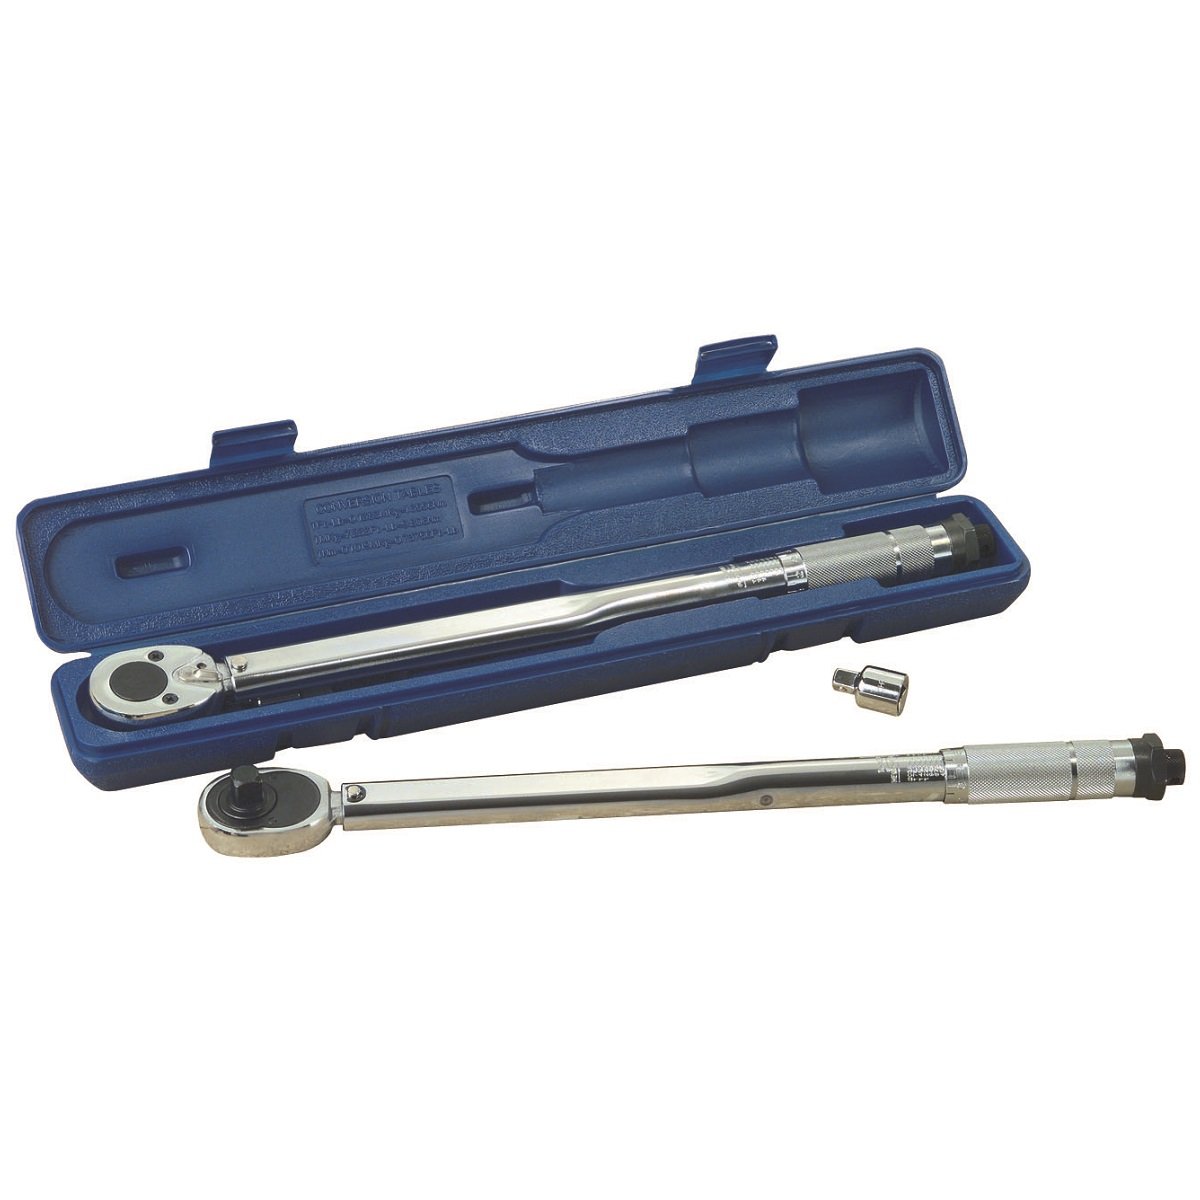 Kincrome Micrometer Torque Wrench 1/2" Square Drive 10 - 150 Ft-lb MTW150F